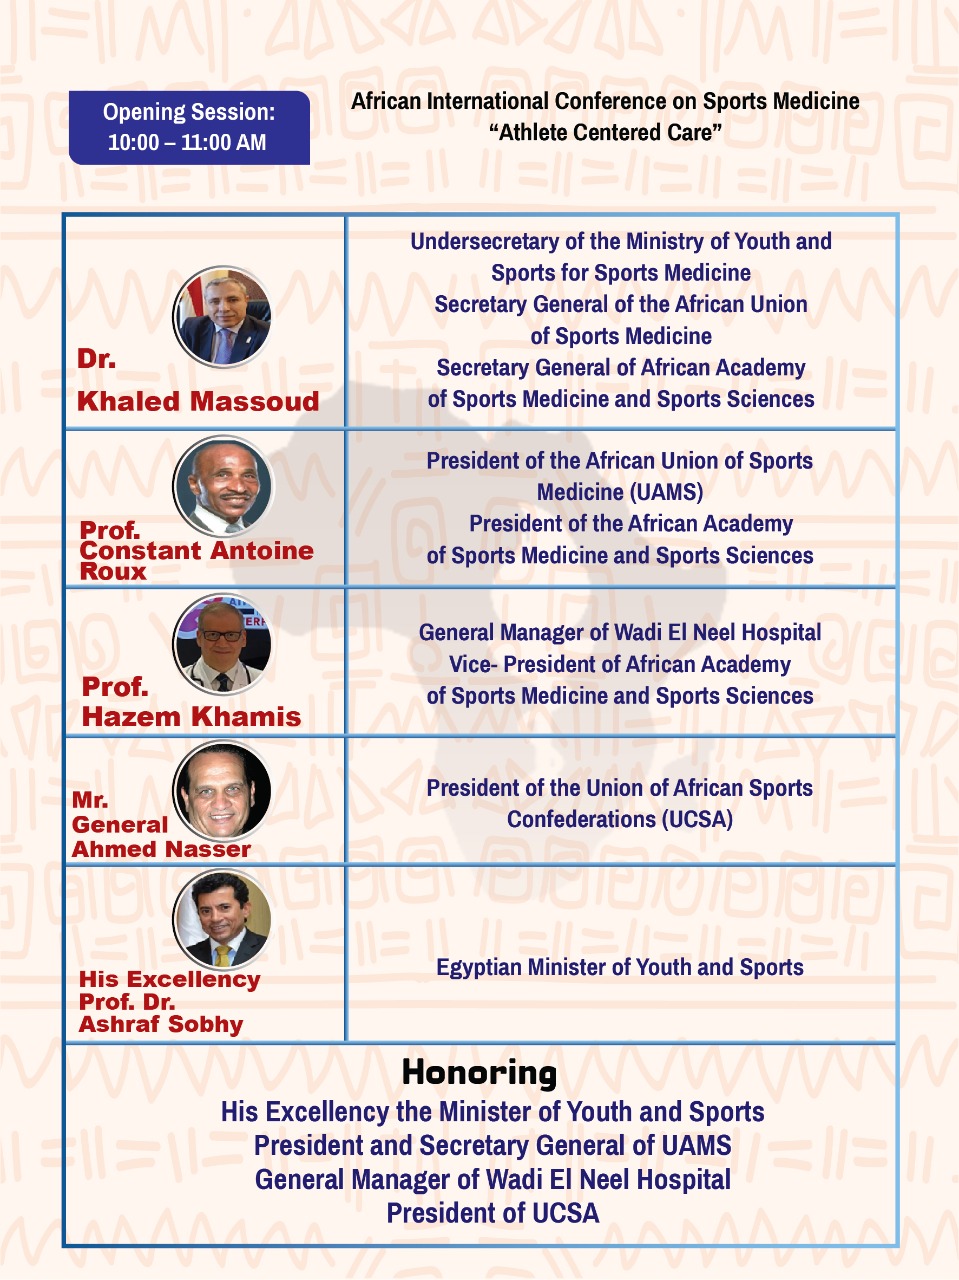 uams | african union of sports medicine